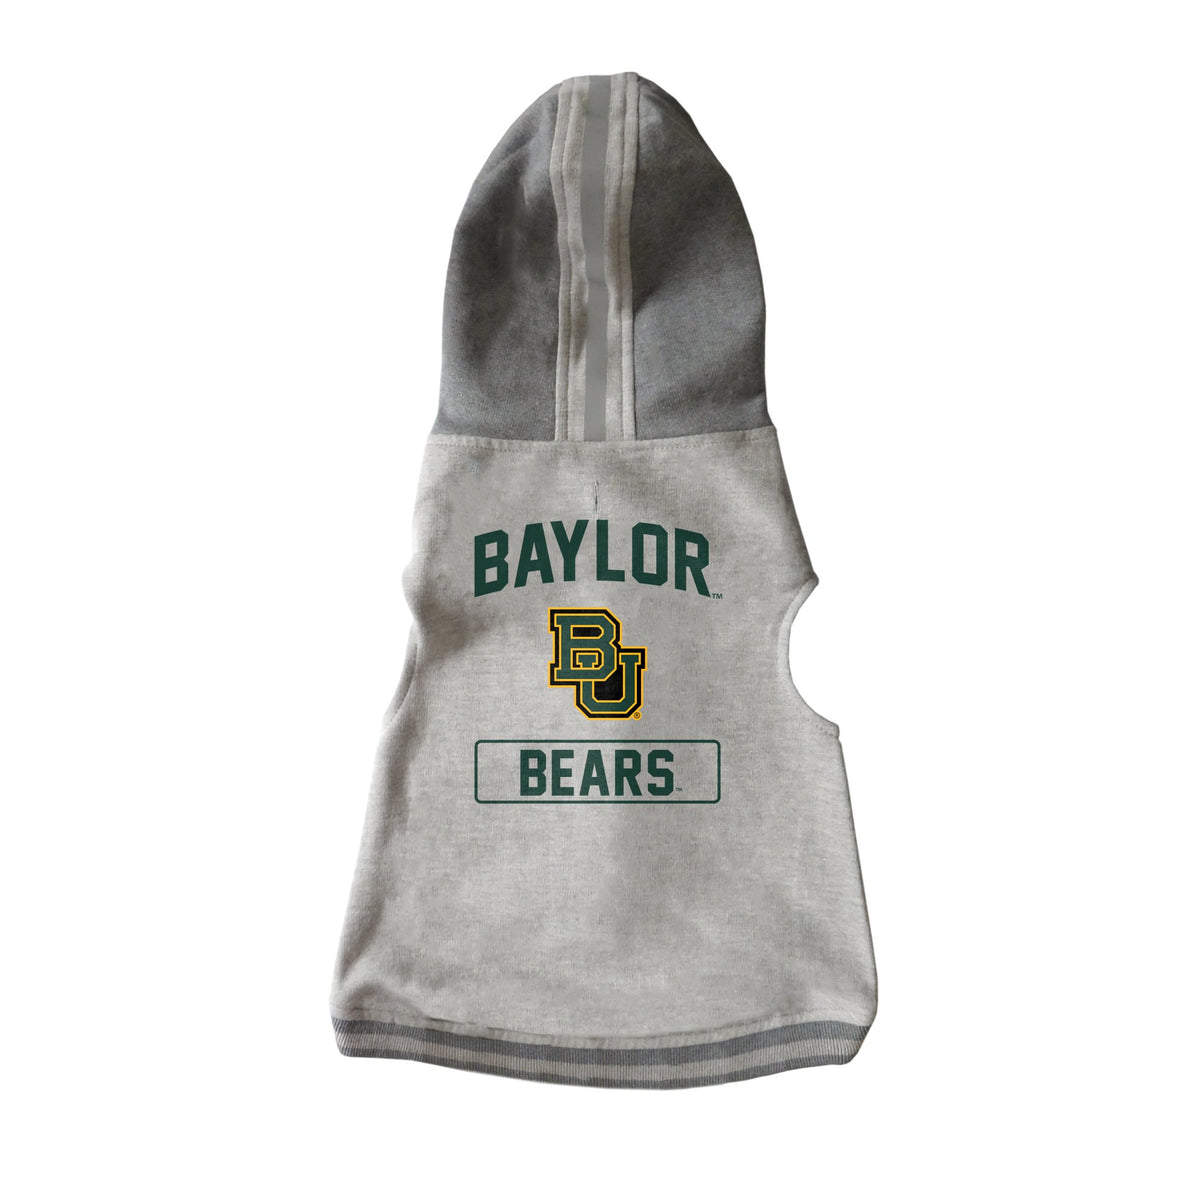 Baylor Bears Hooded Crewneck - 3 Red Rovers